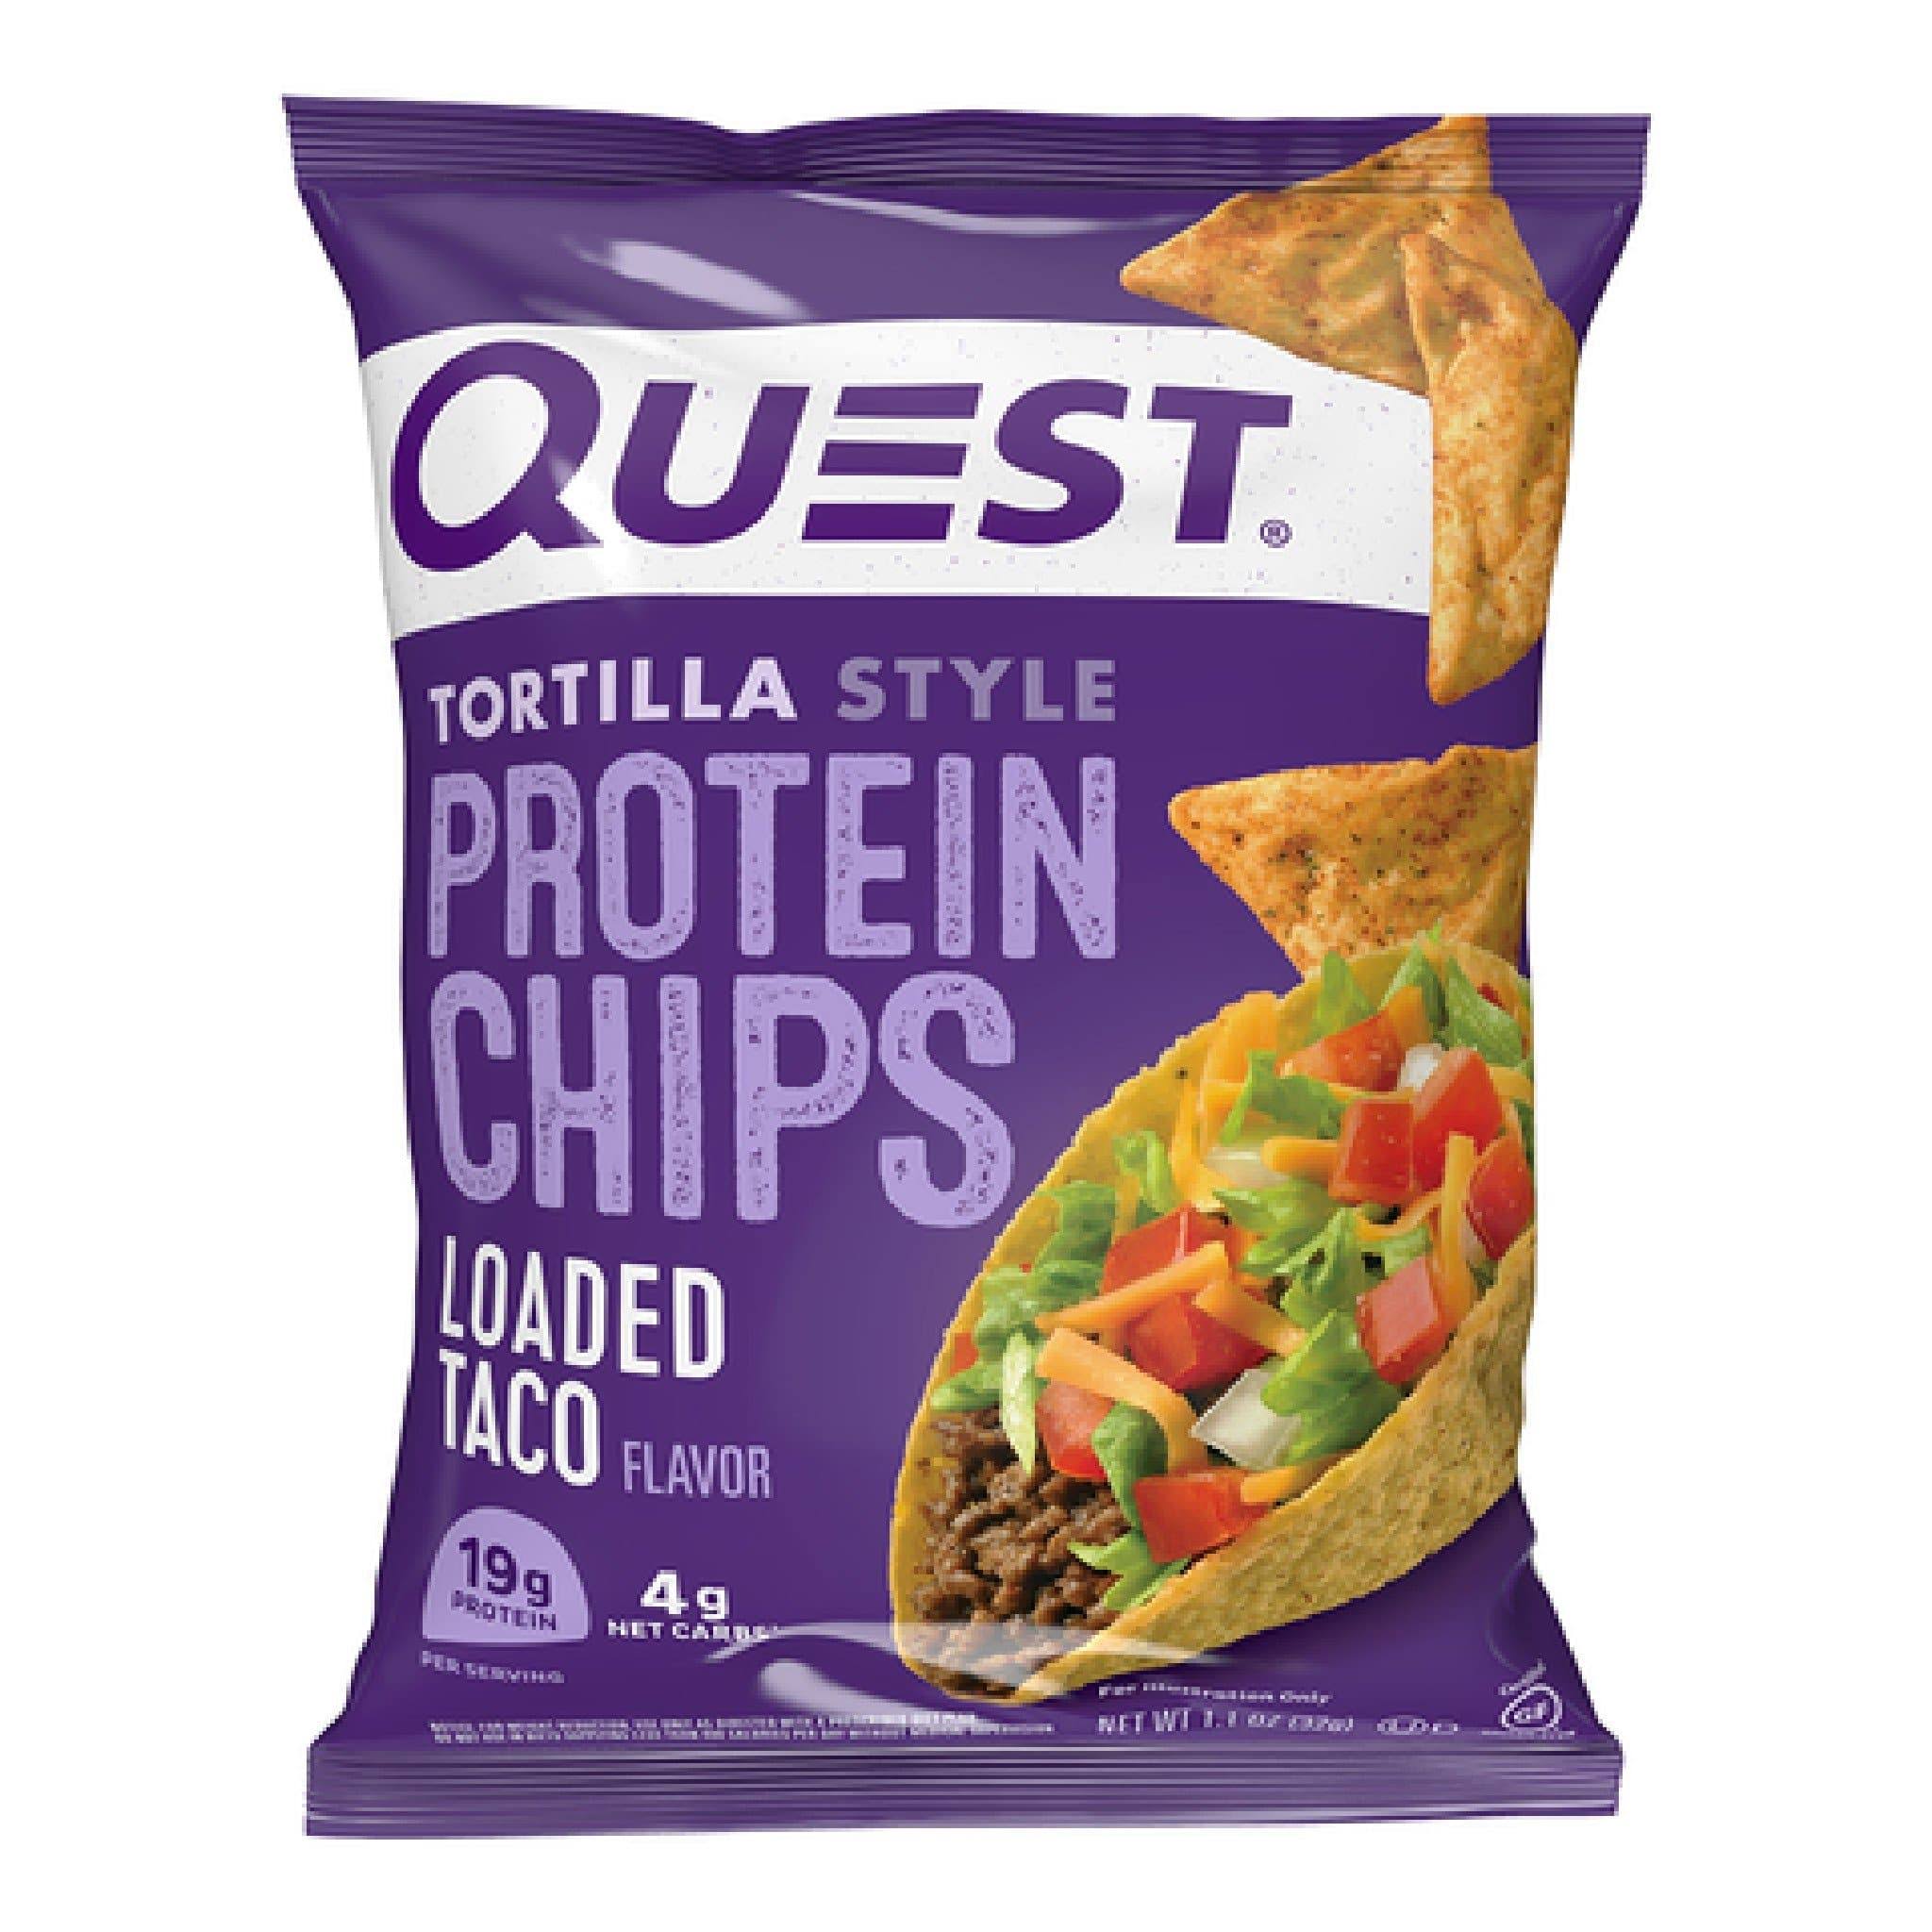 Quest Tortilla Protein Chips - Loaded Taco